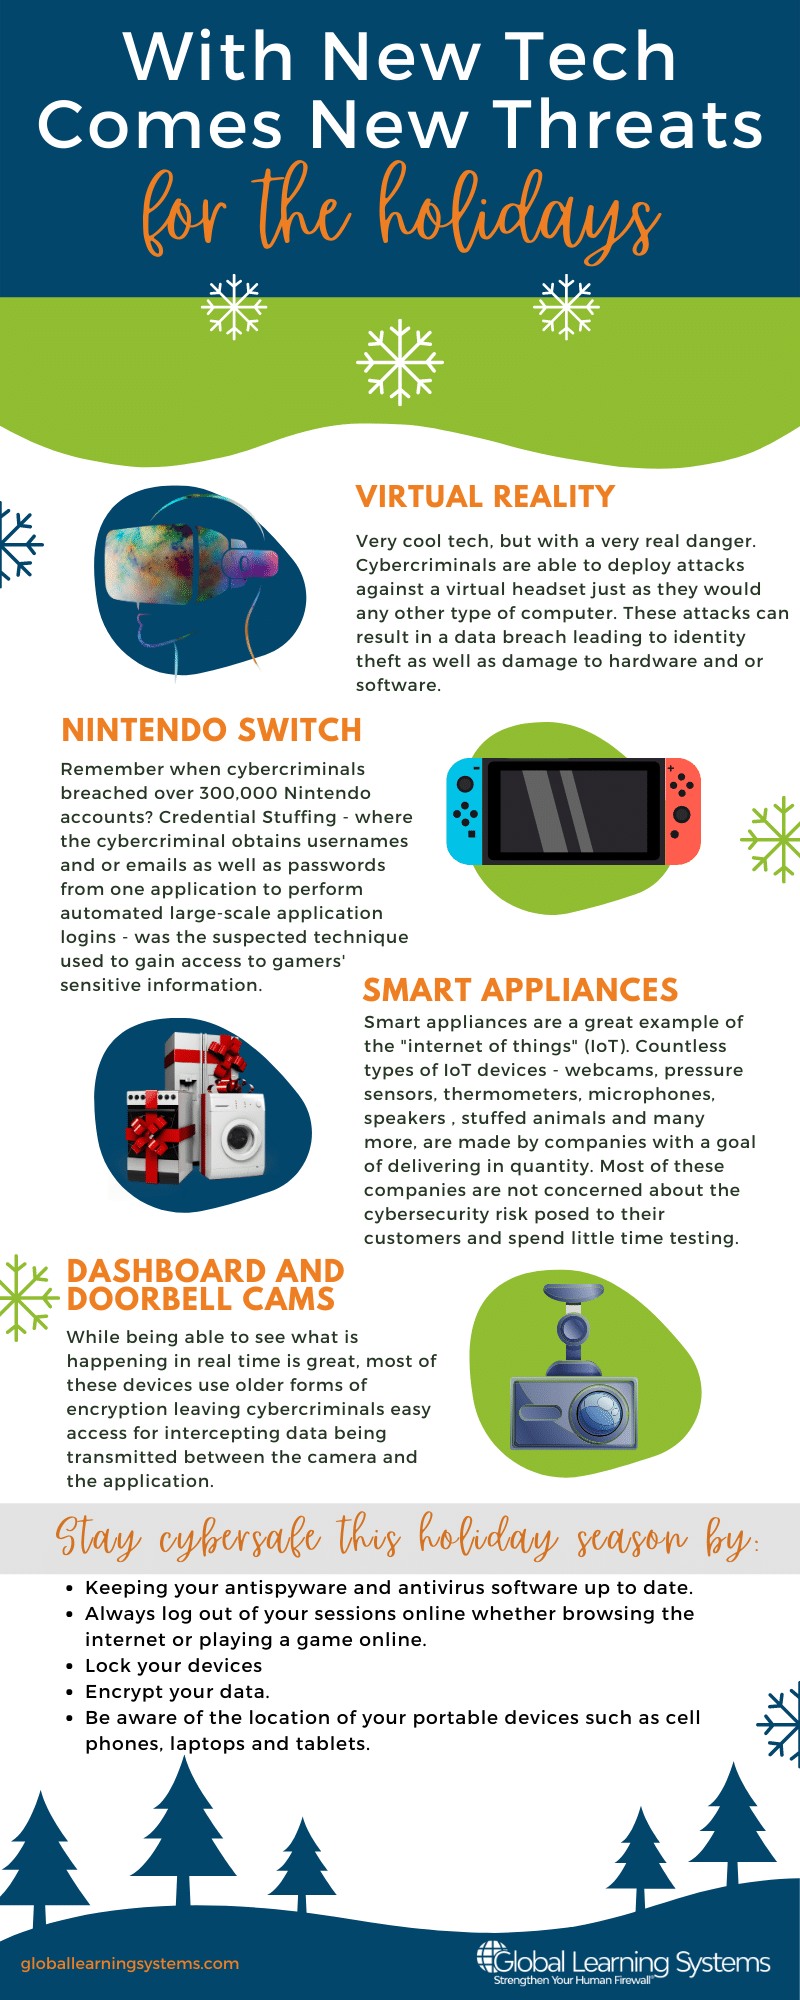 New Tech for the Holidays - InfoGraphic (2)